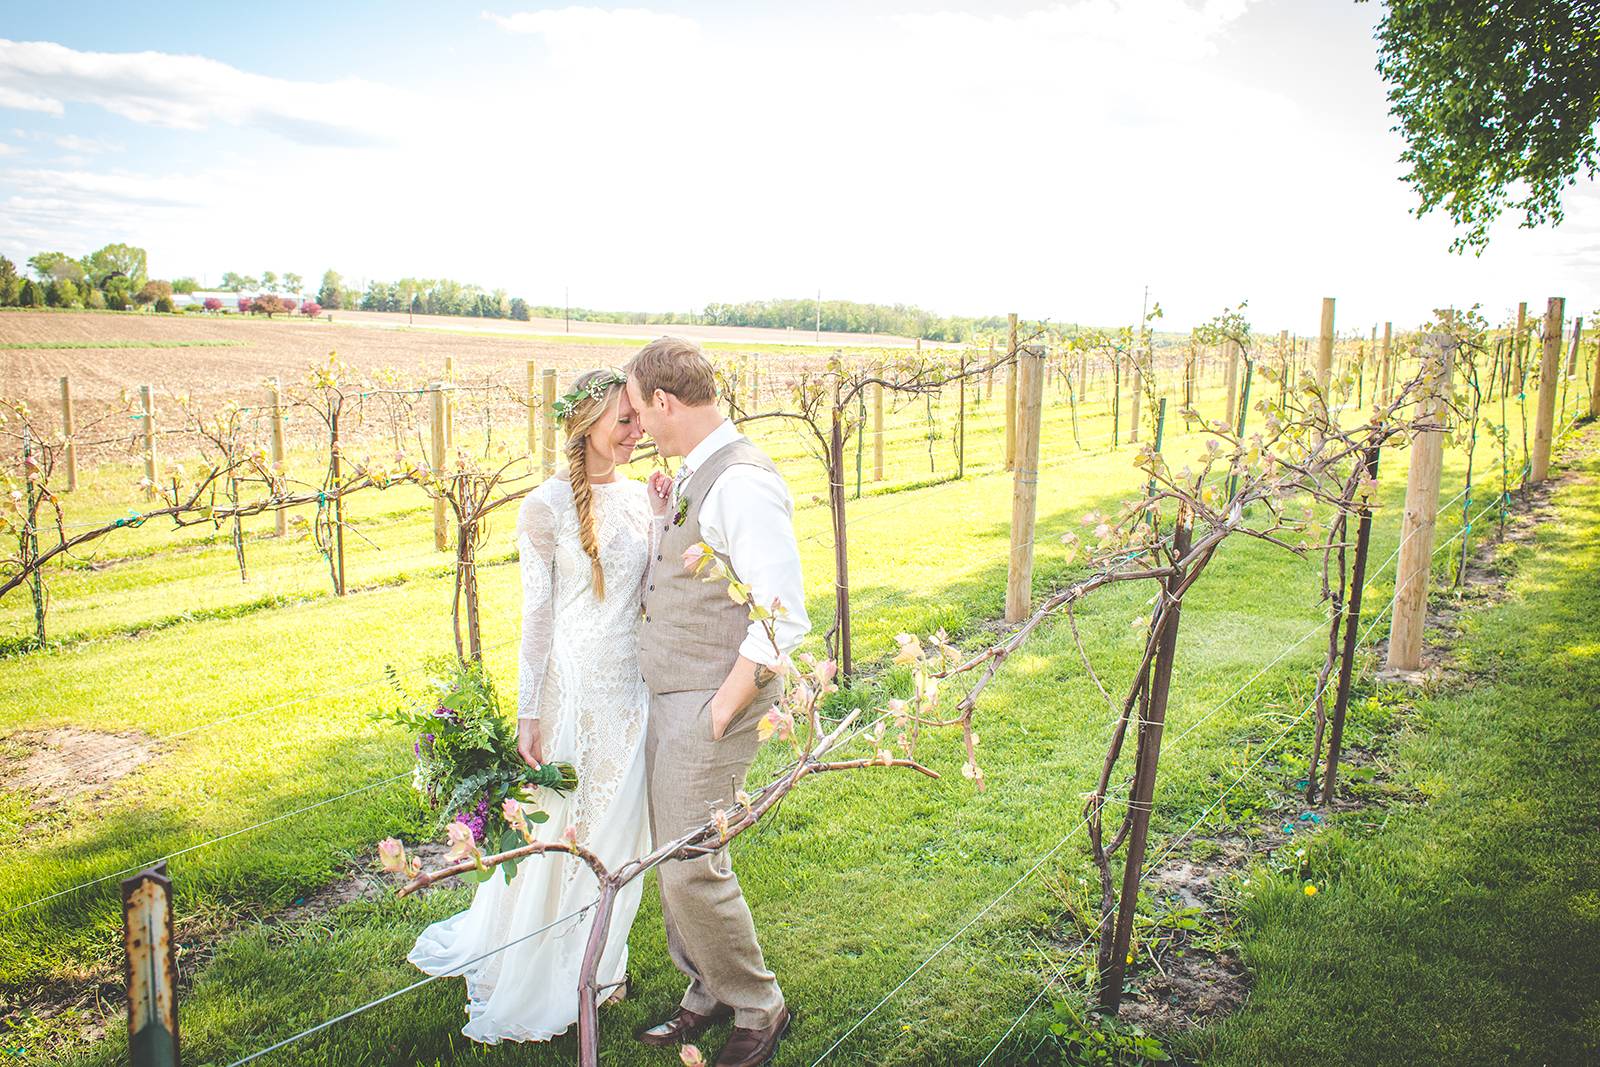 winery vineyard wedding portrait sessions , over the vines wedding venue reception